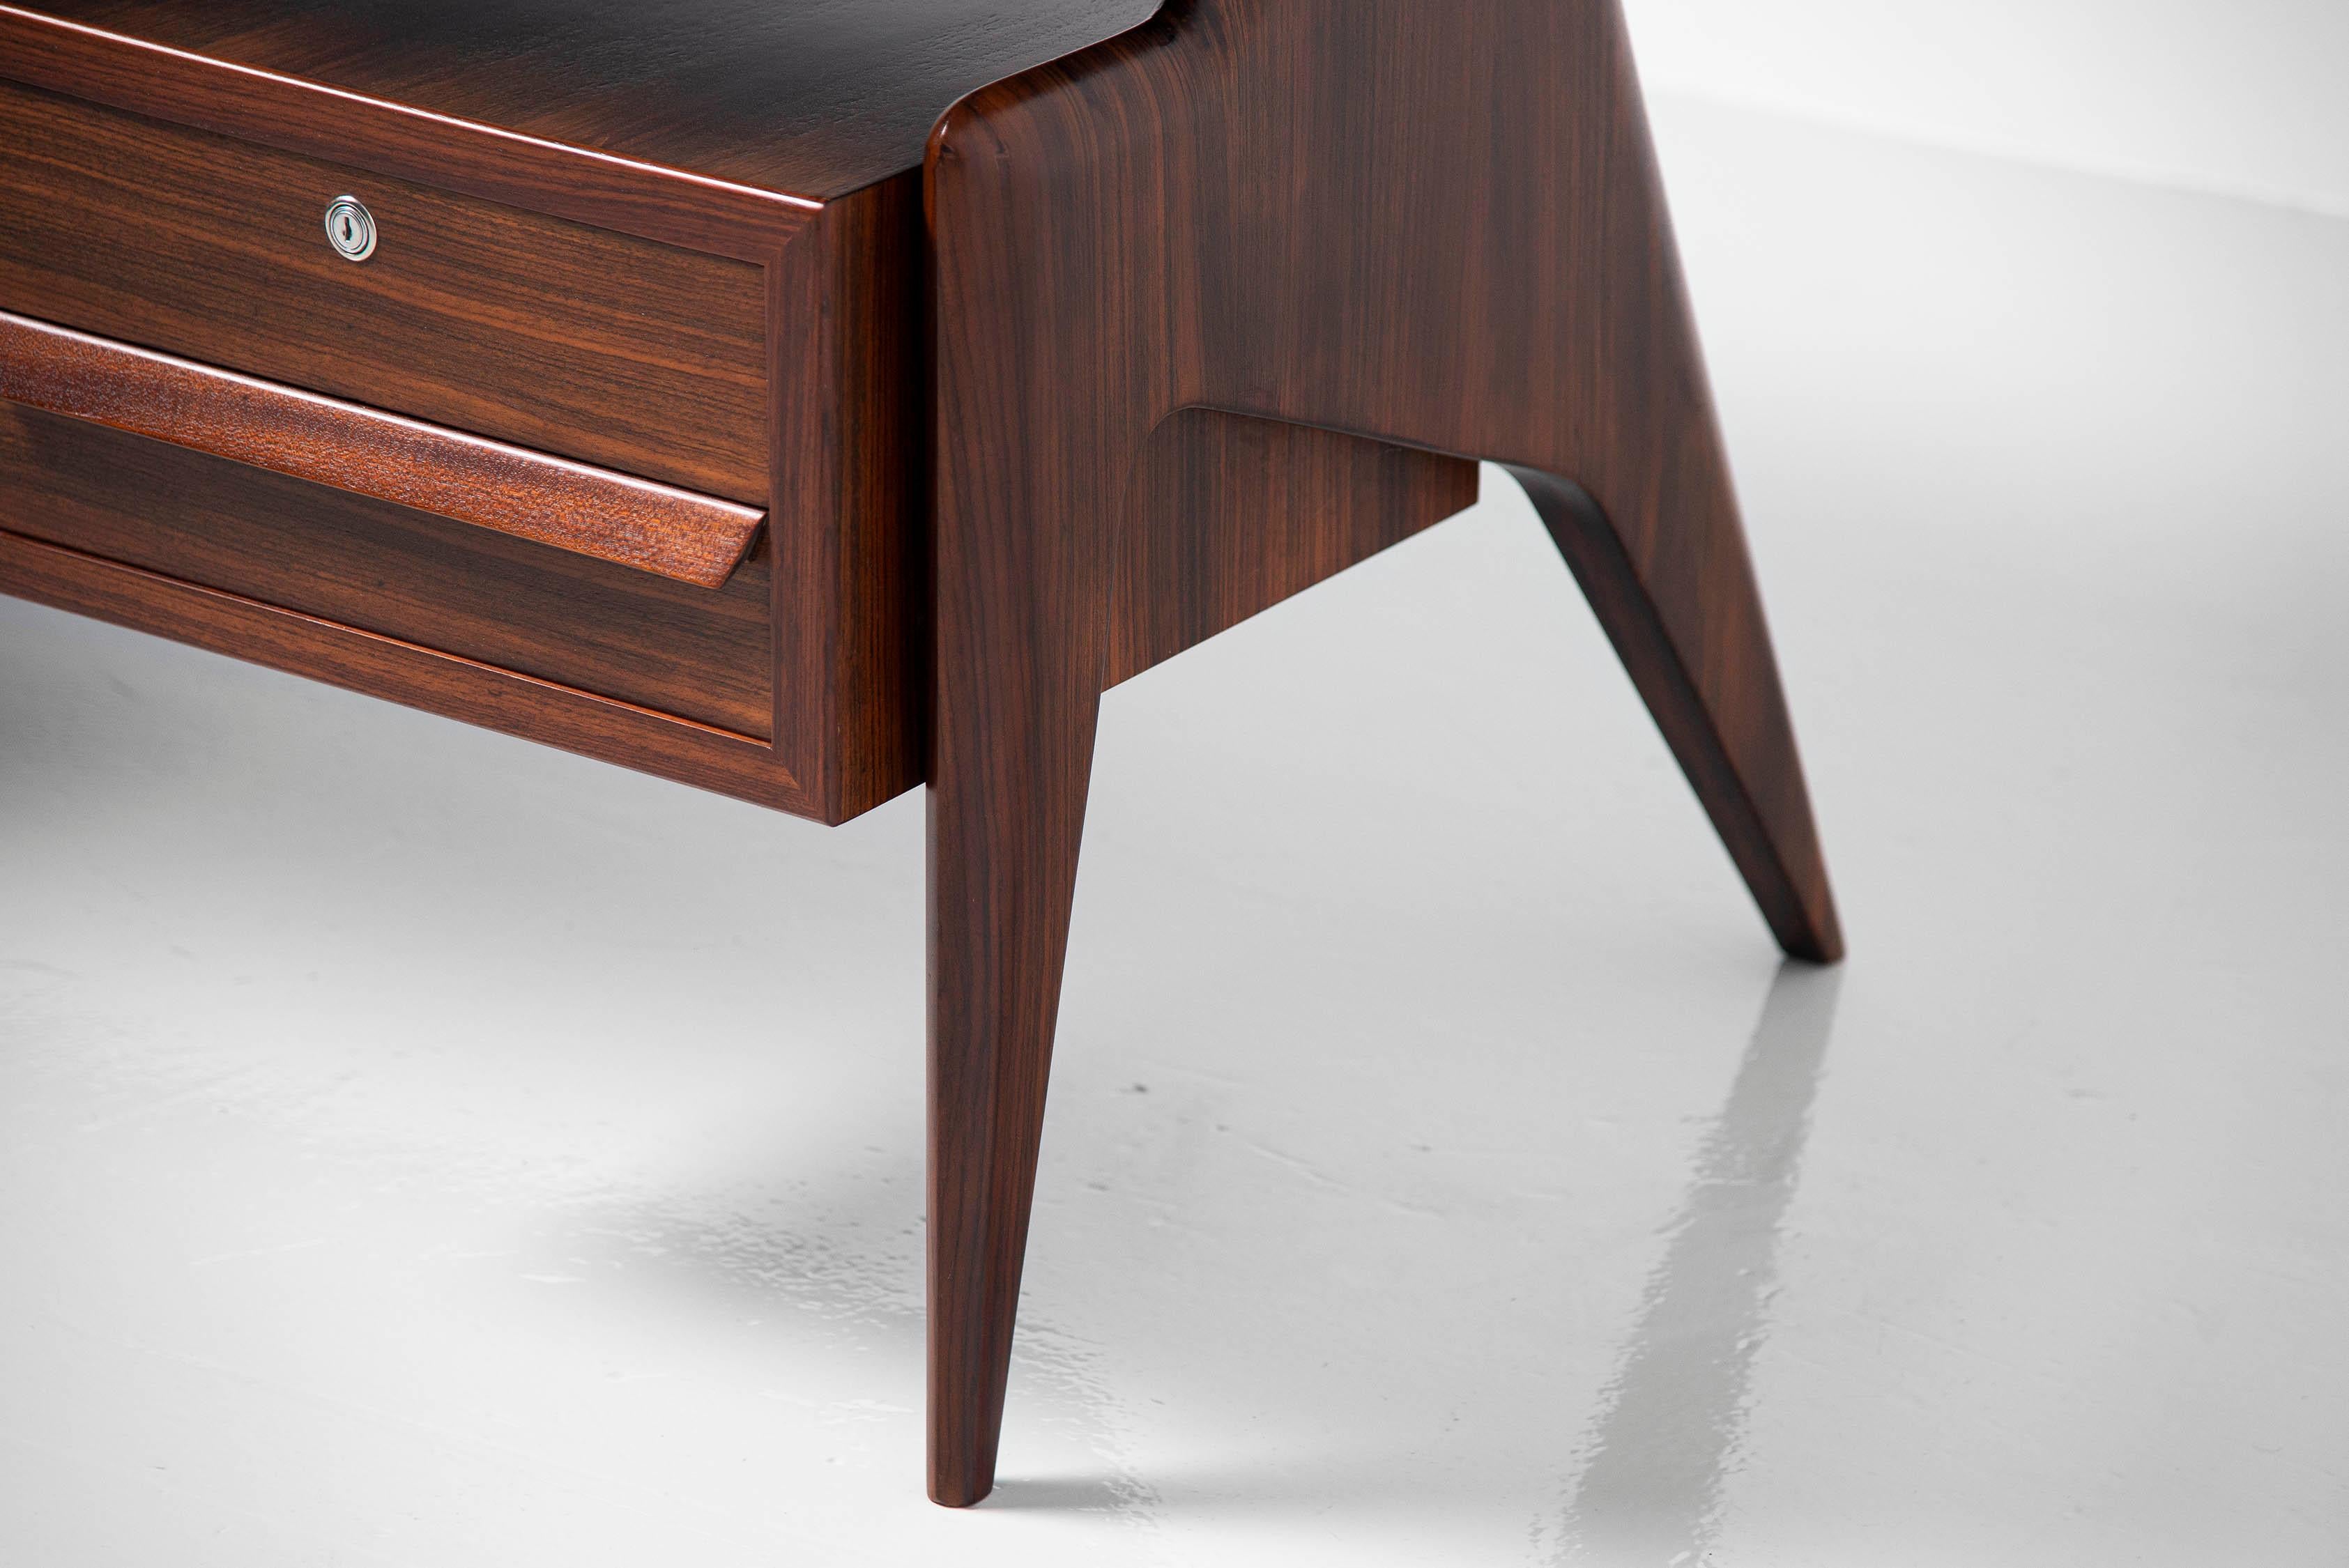 Super shaped writing desk designed by Vittorio Dassi and manufactured by Dassi, Italy 1950. Vittorio Dassi learned his cabinet making skills while working for Gio Ponti, after and during that period he also started to design pieces from his own.